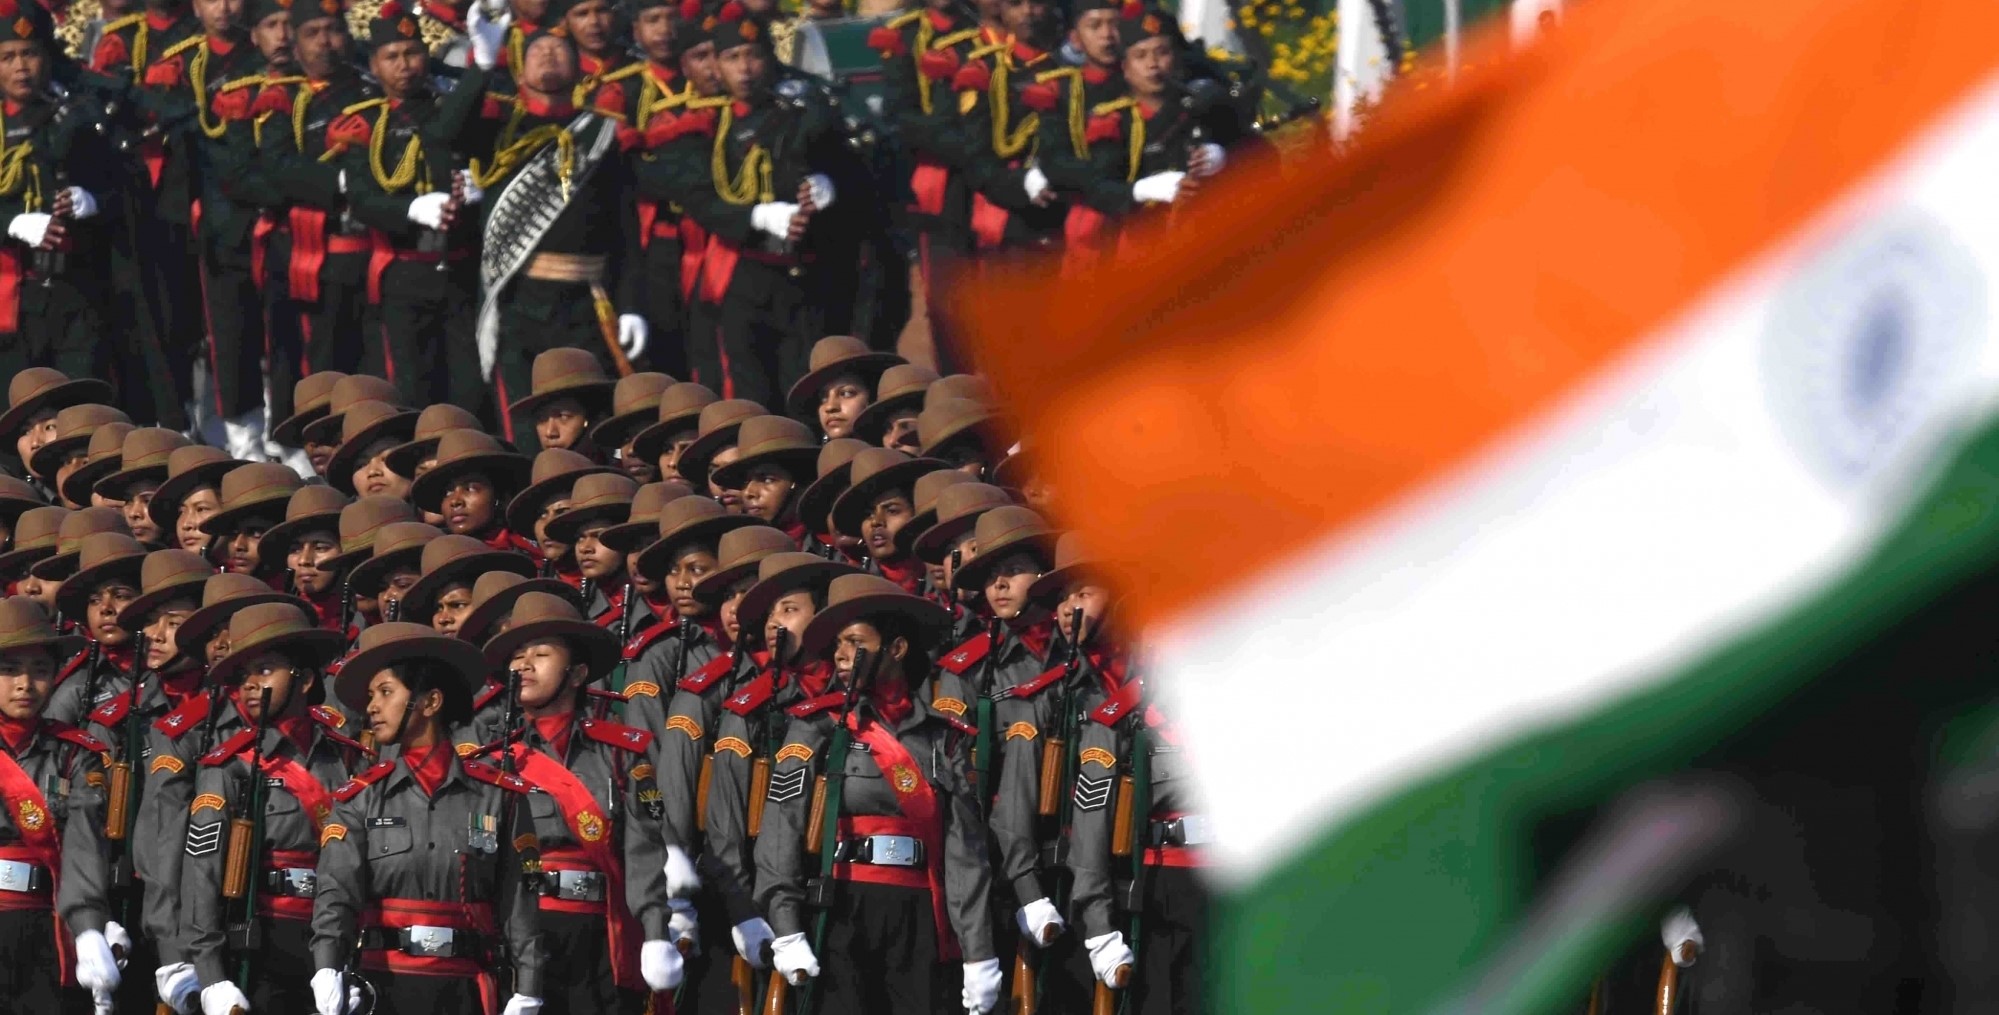 Republic Day parade to see 24,000 people in attendance, foreign dignitary as chief guest unlikely